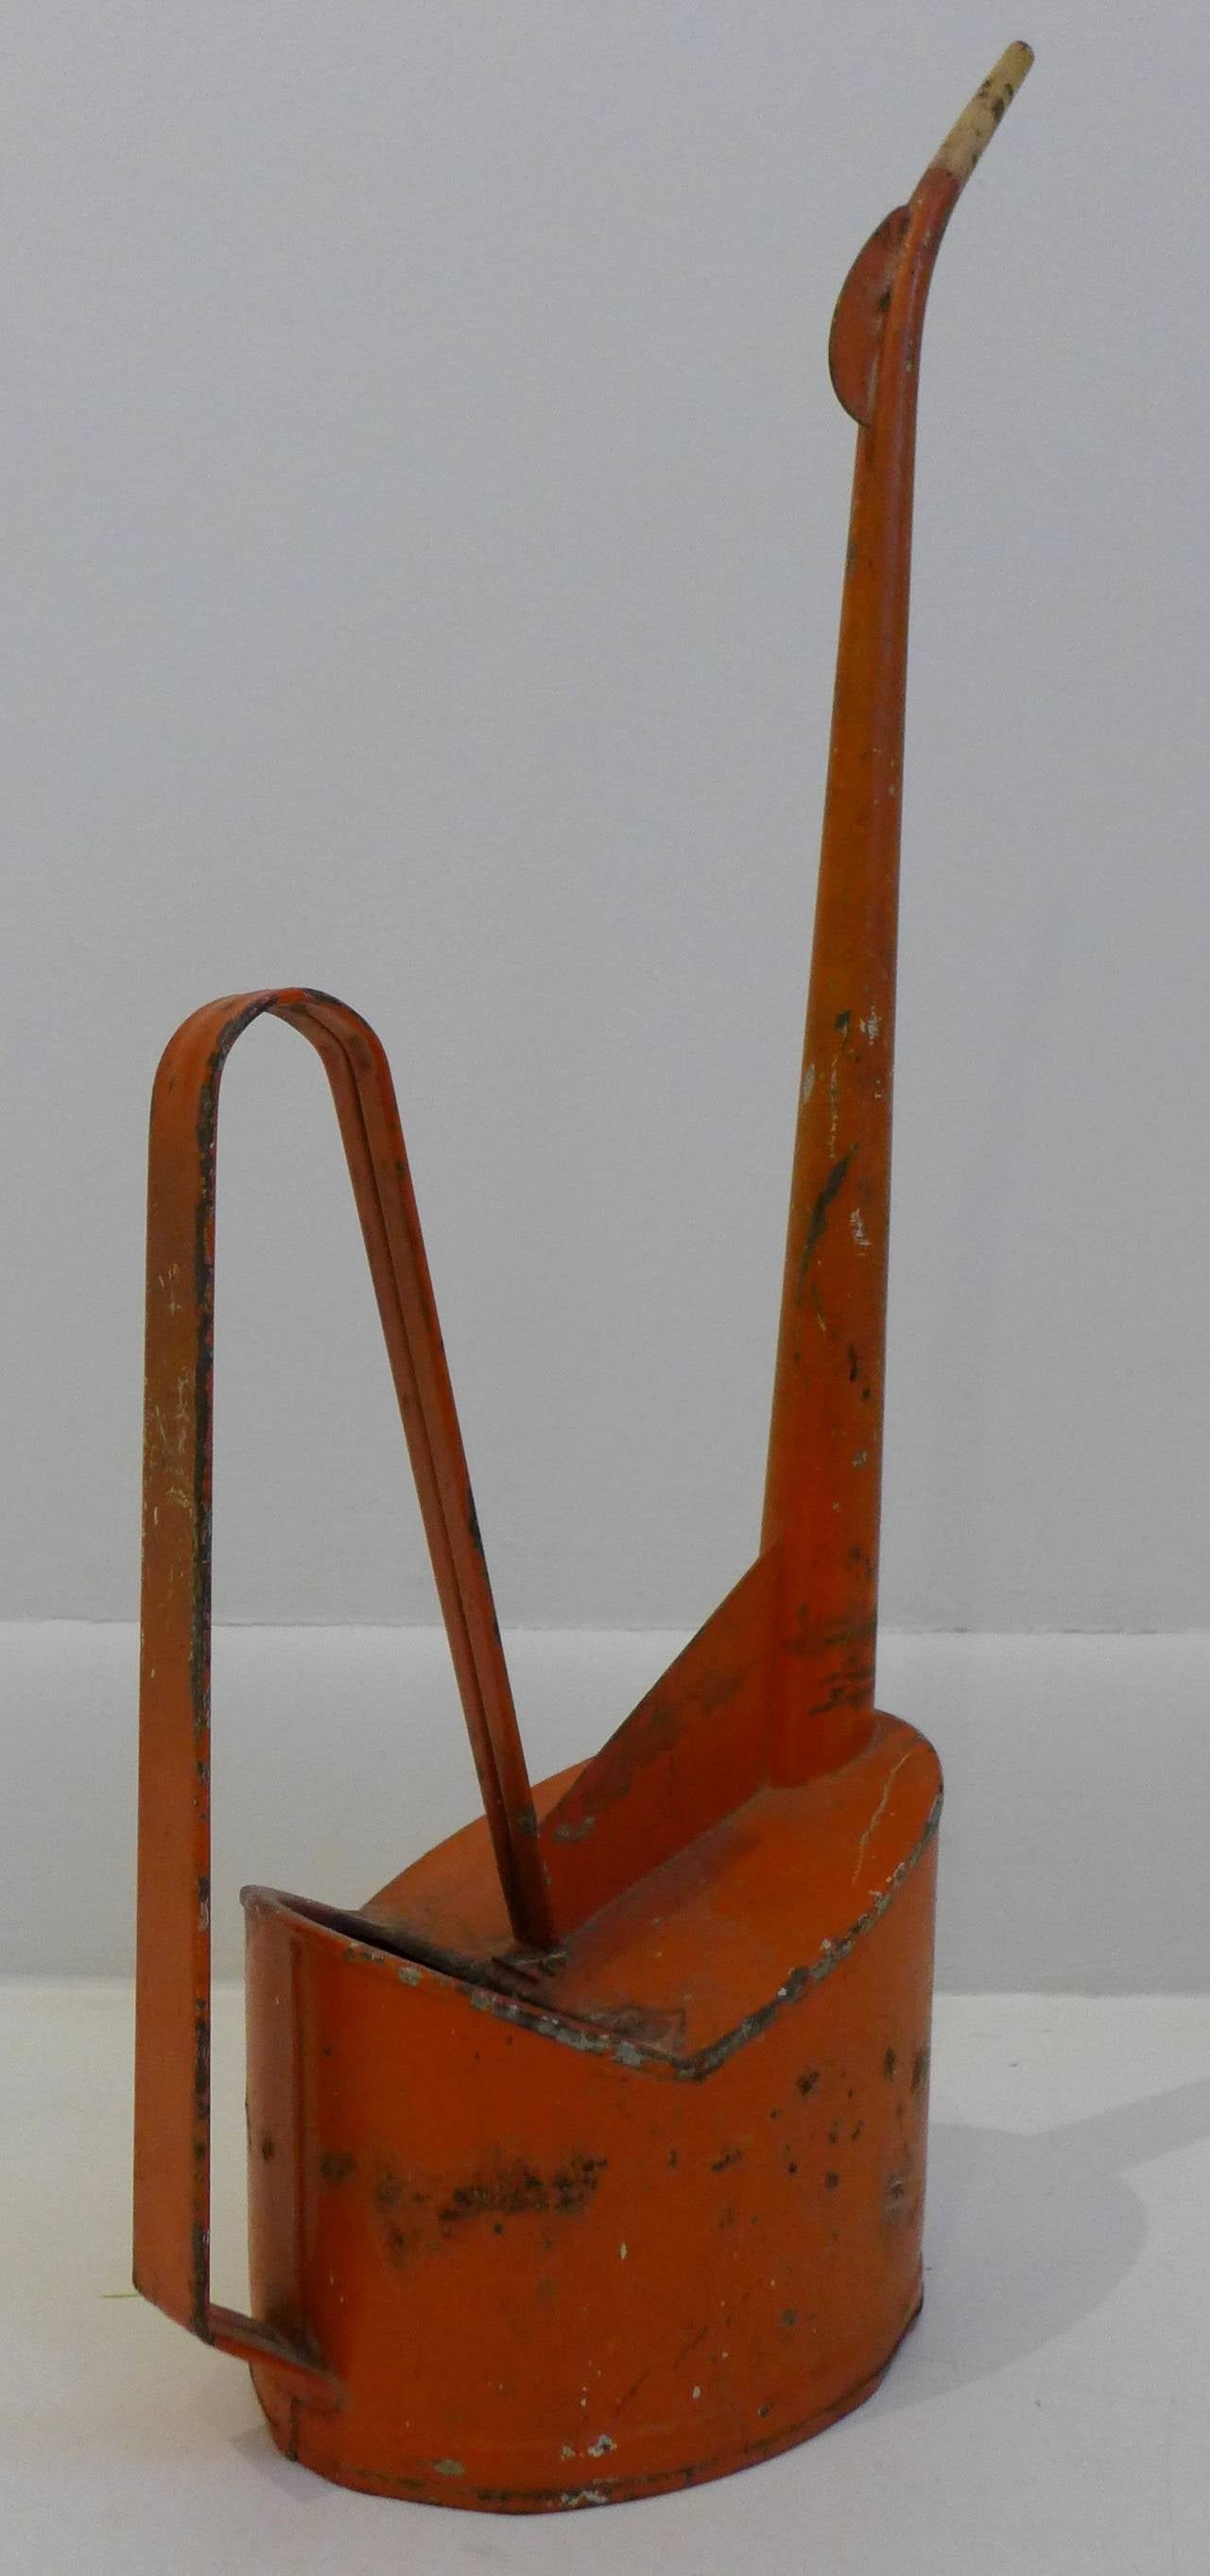 Painted metal watering can in a playful, futuristic deco style by Swiss architect and industrial designer Wilhelm Kienzle, made circa 1930s by MEWA (the company that made the aluminum furniture by Hans Coray). Kienzle (1886-1958) worked with Peter